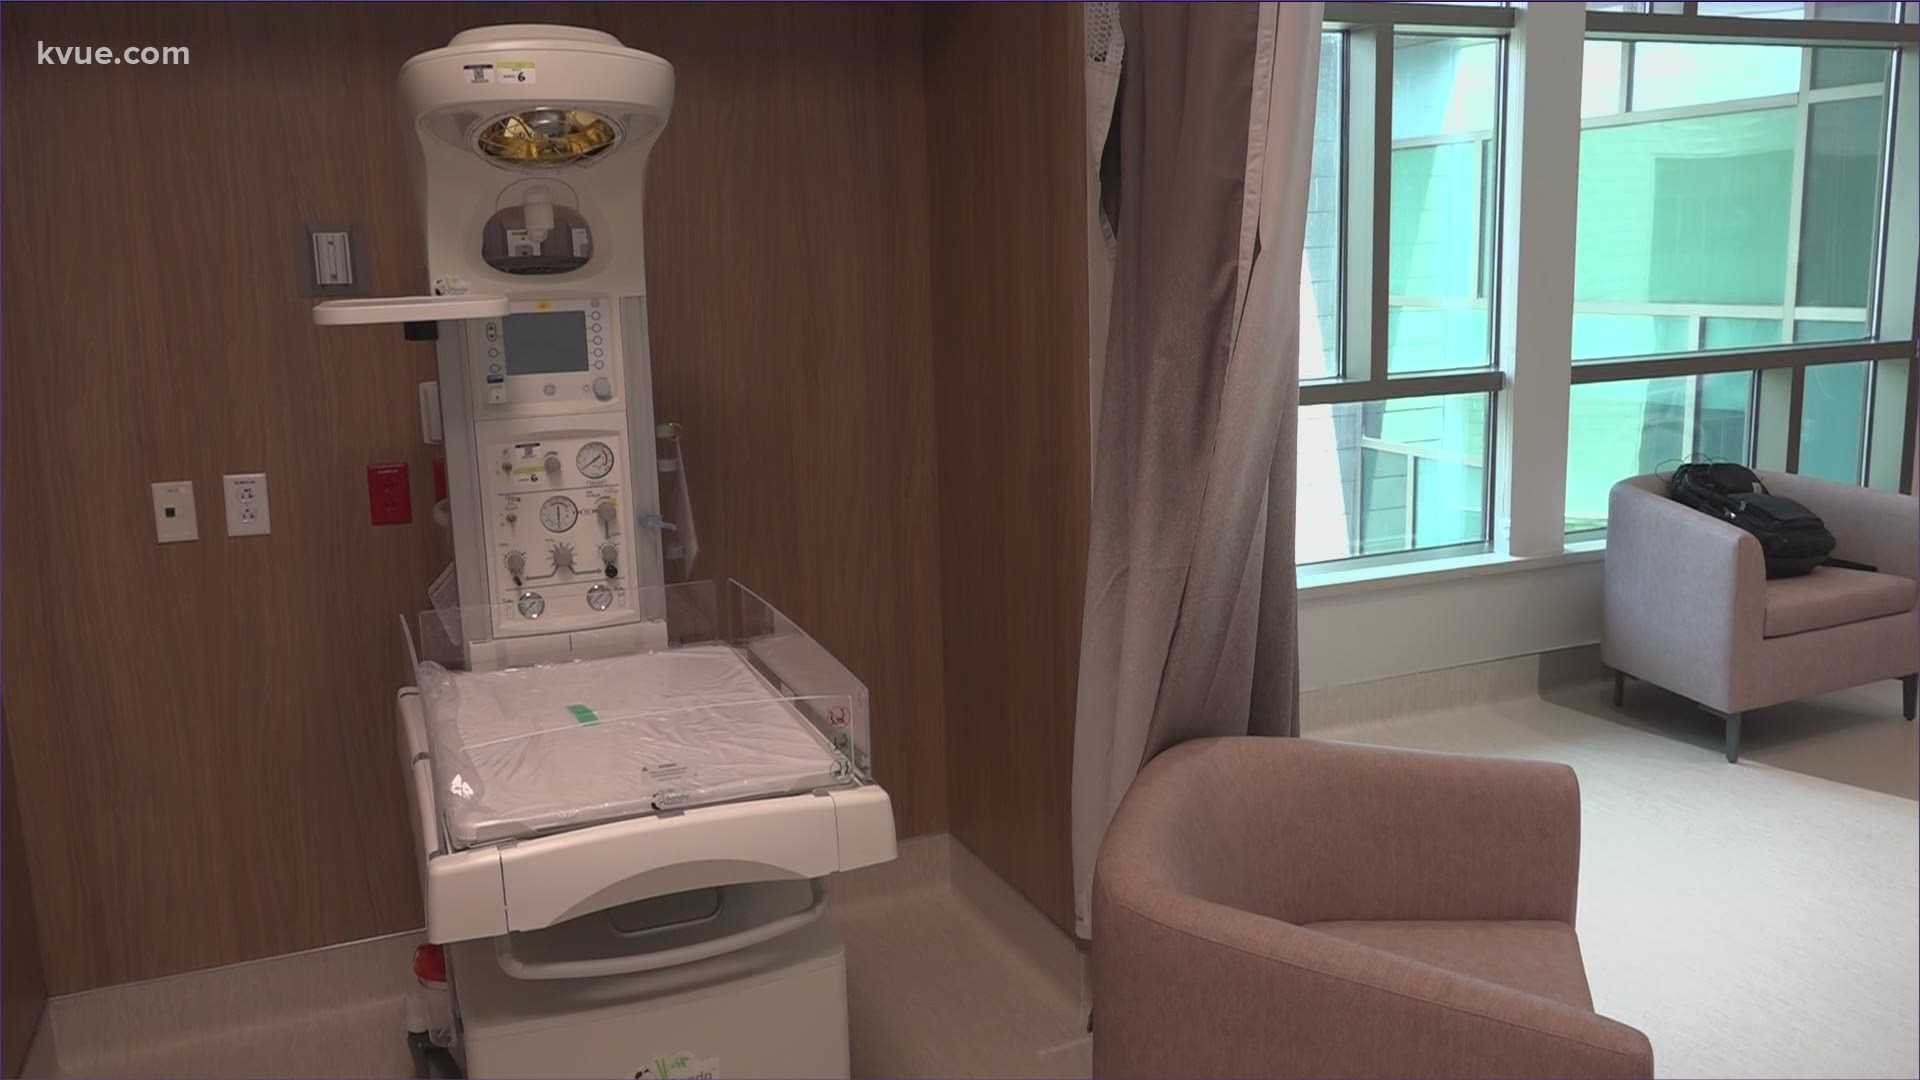 The unit is designed for mothers who are low risk with high-risk babies, allowing them to go straight from delivery into surgery at the same location.